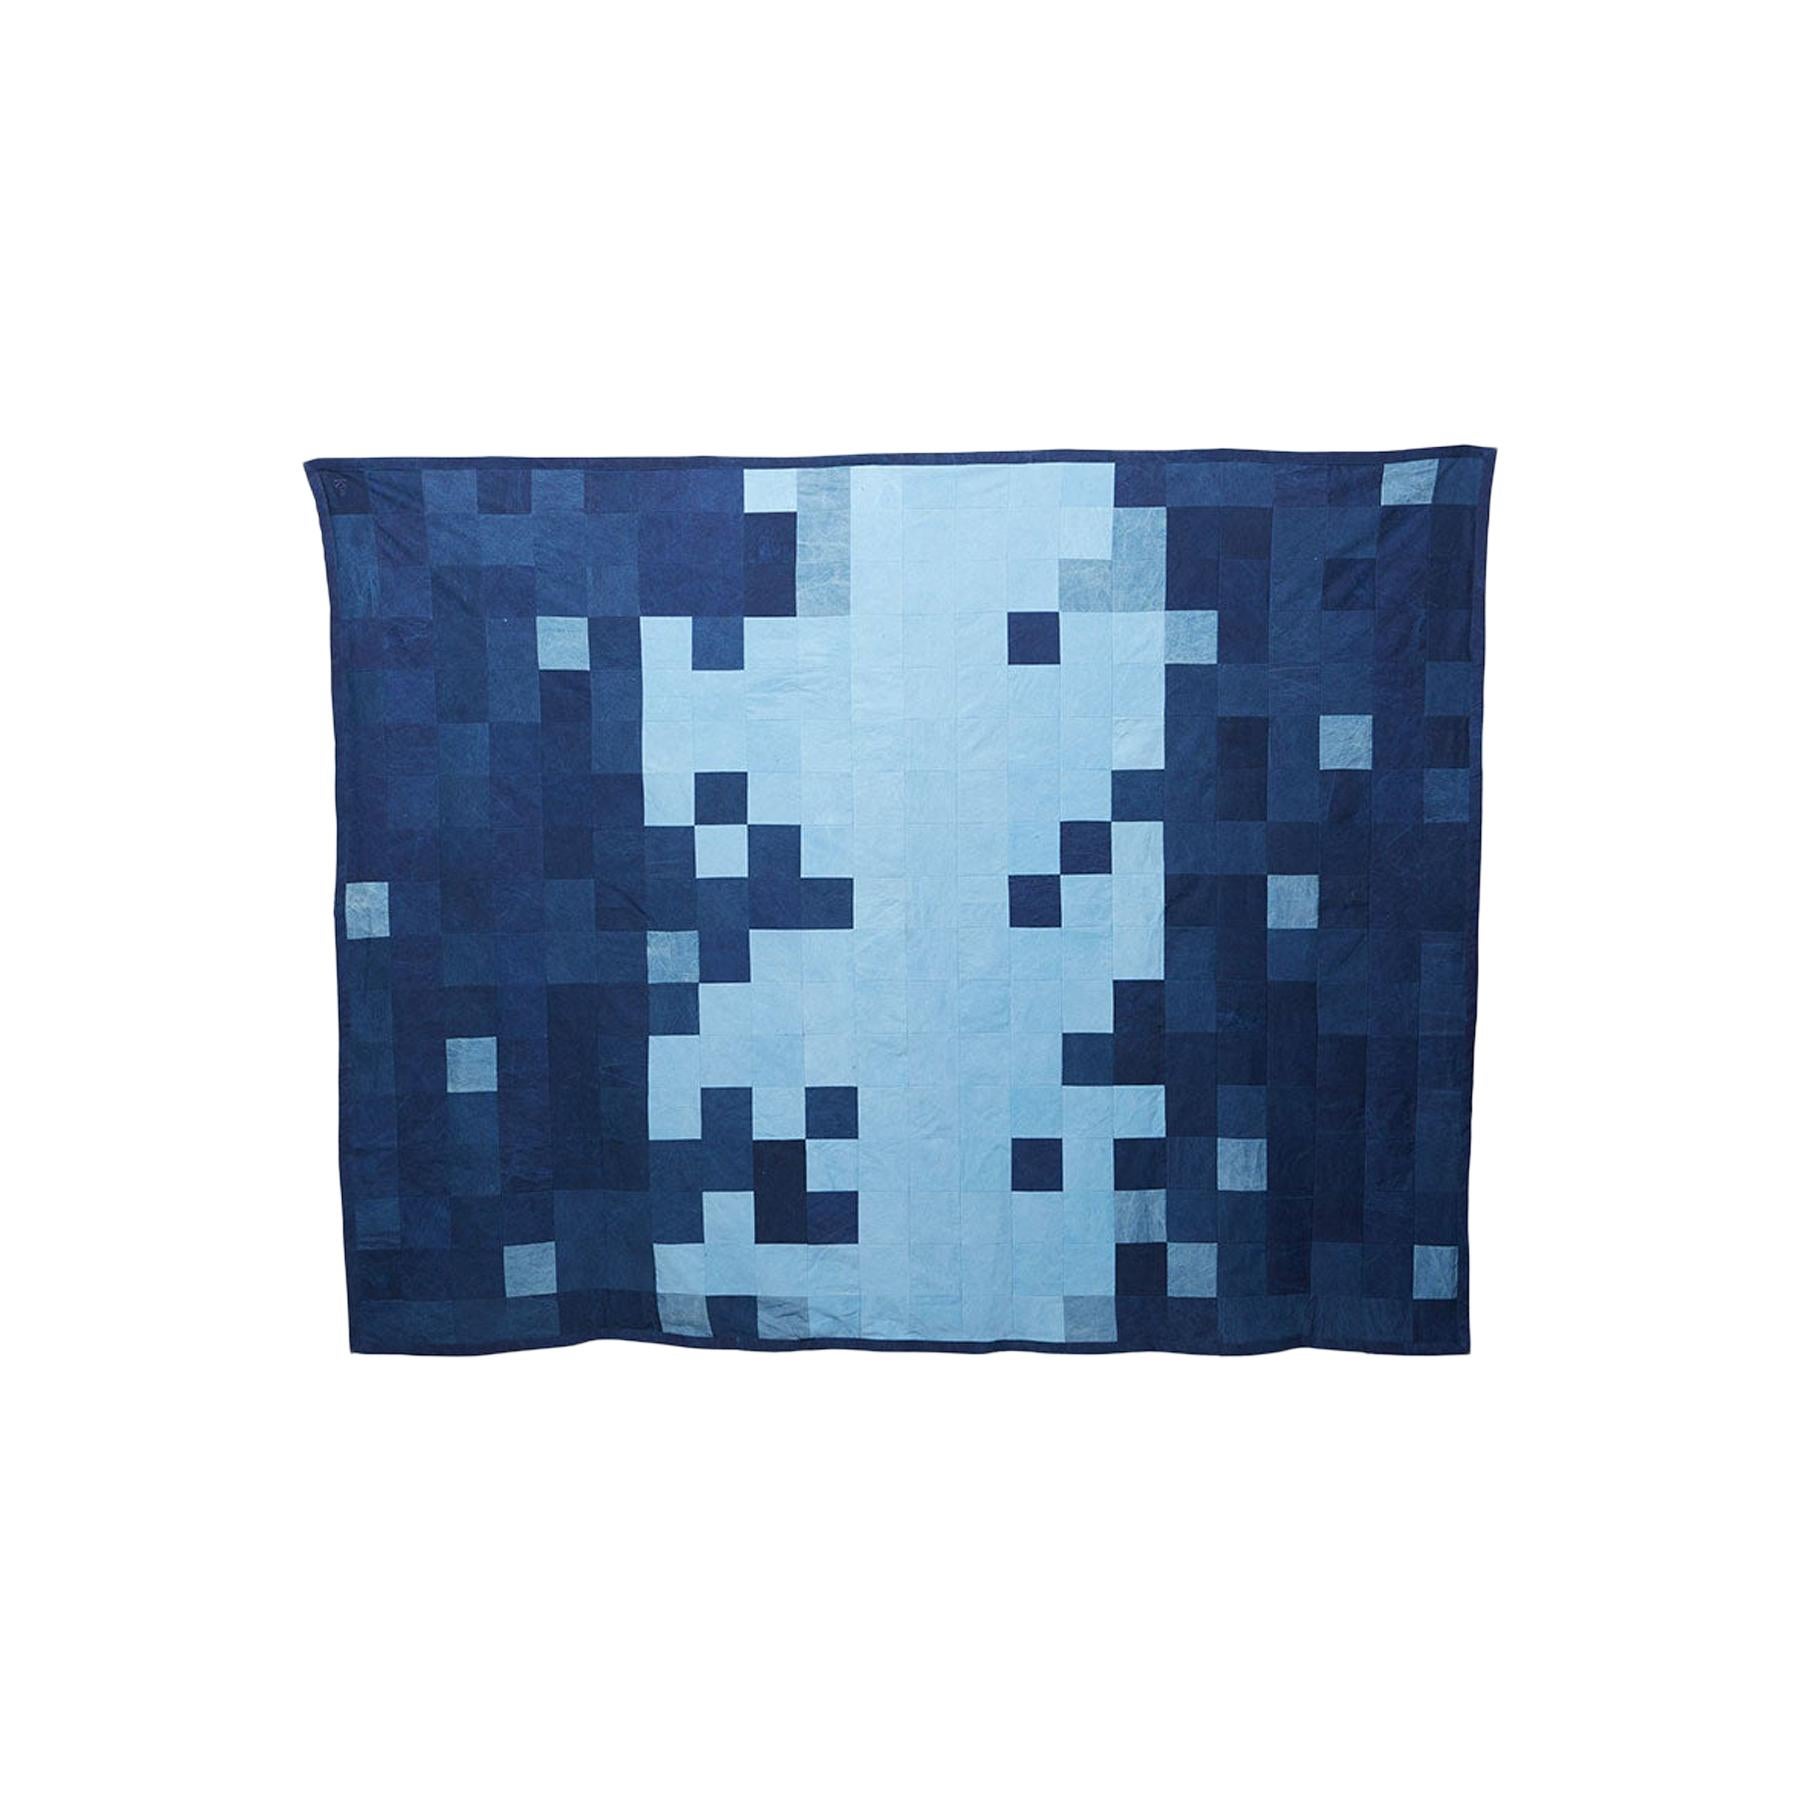 Hand-Dyed Indigo Canvas Quilt For Sale